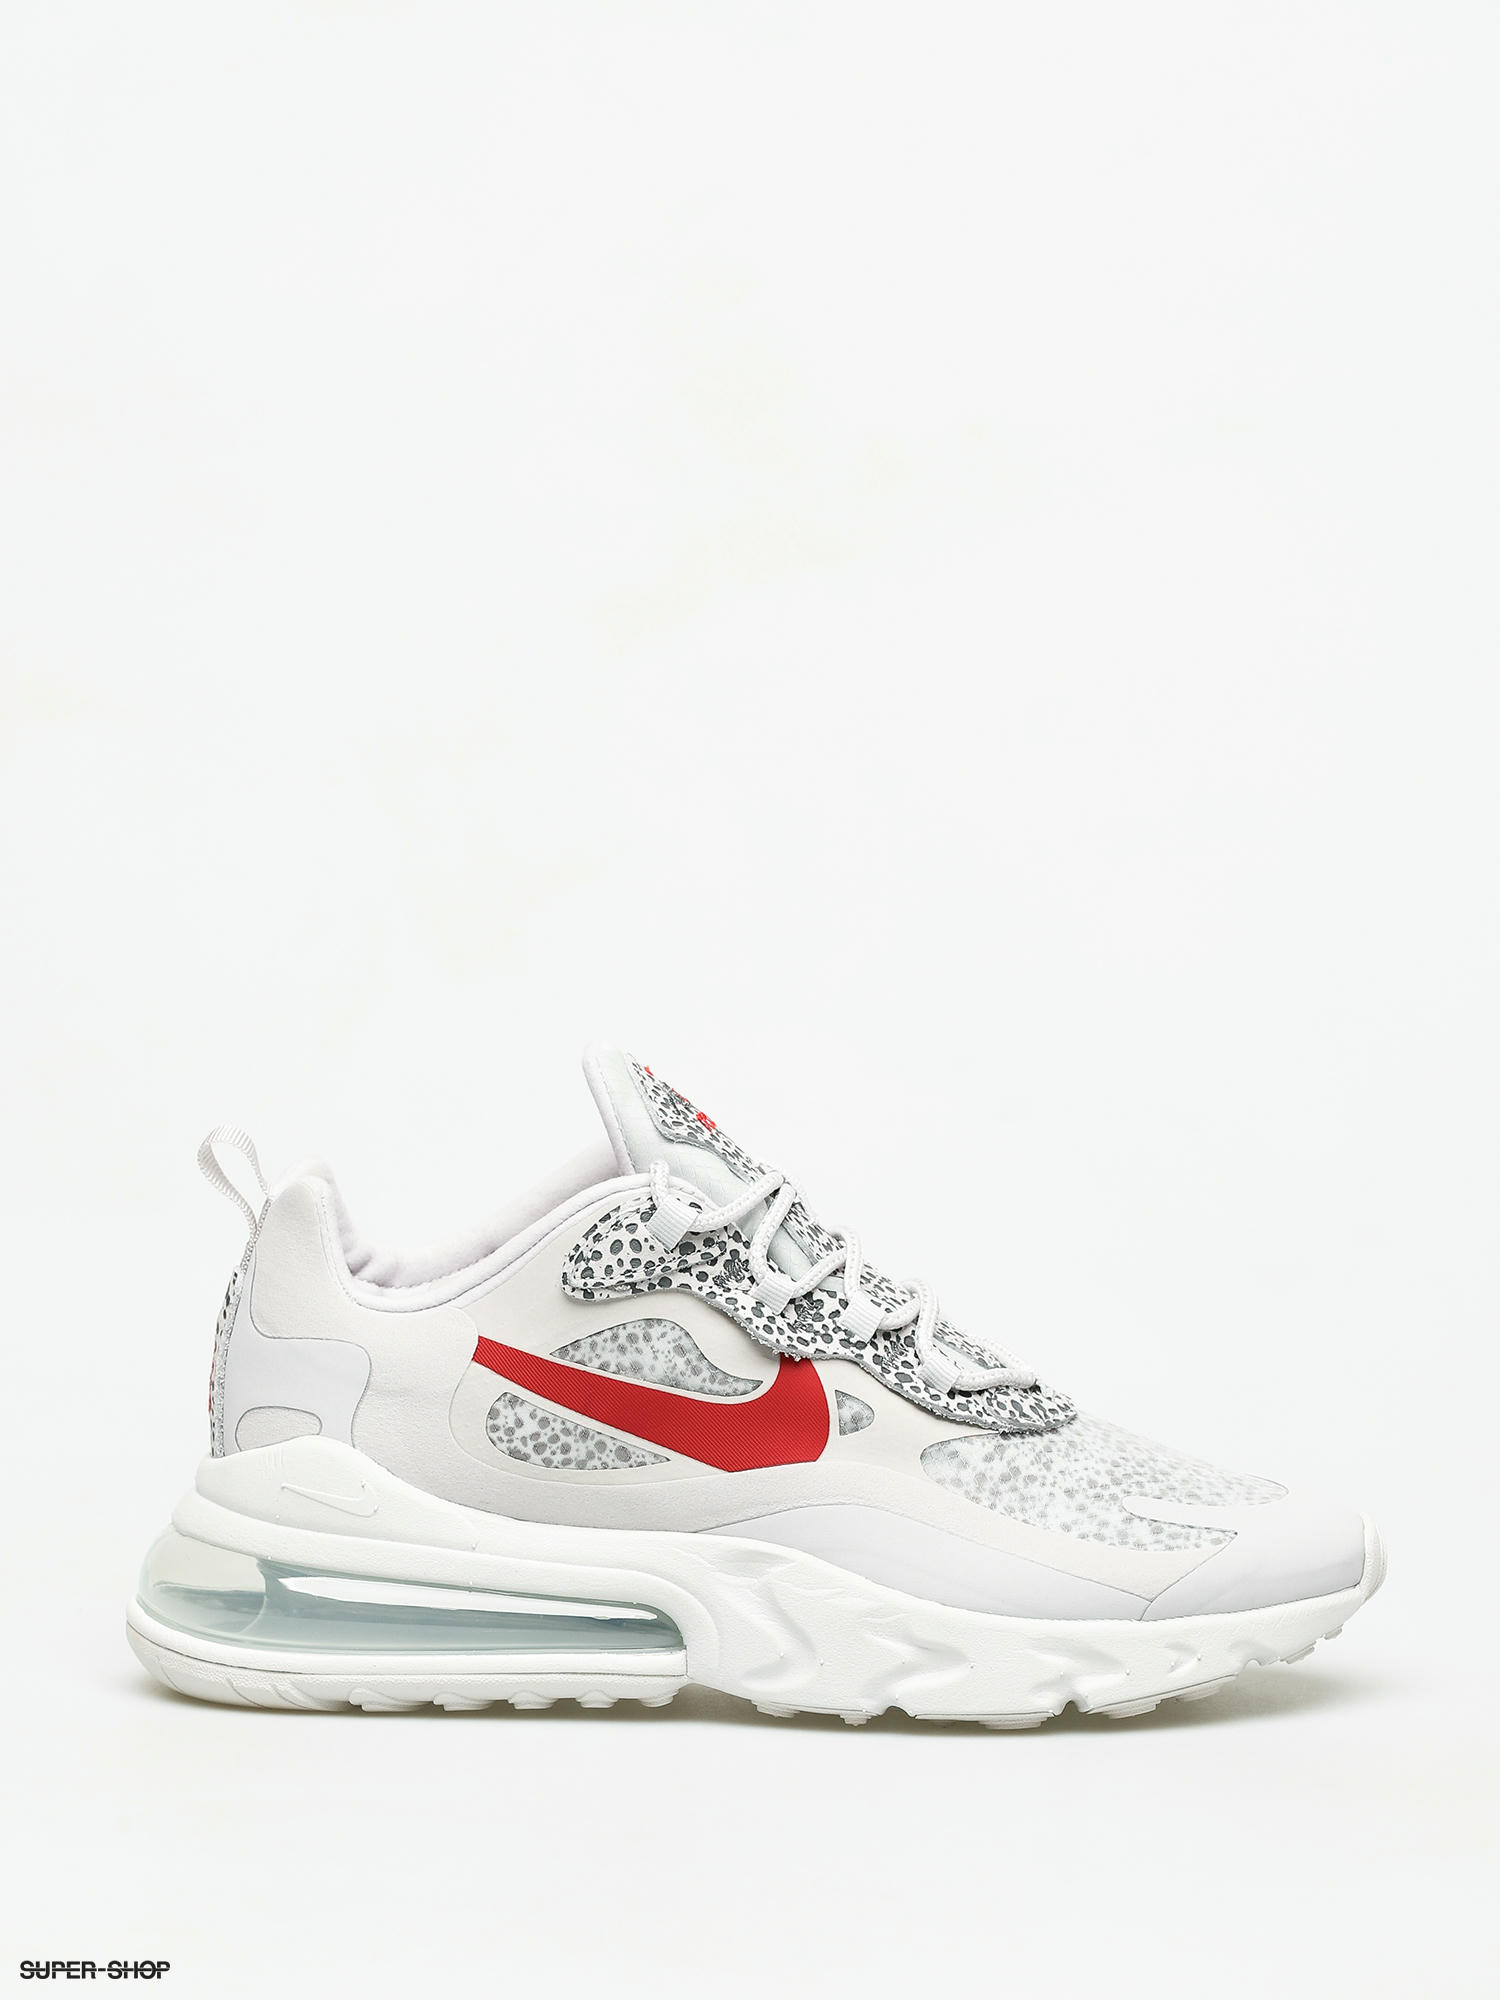 nike air max 27 bowfin university red